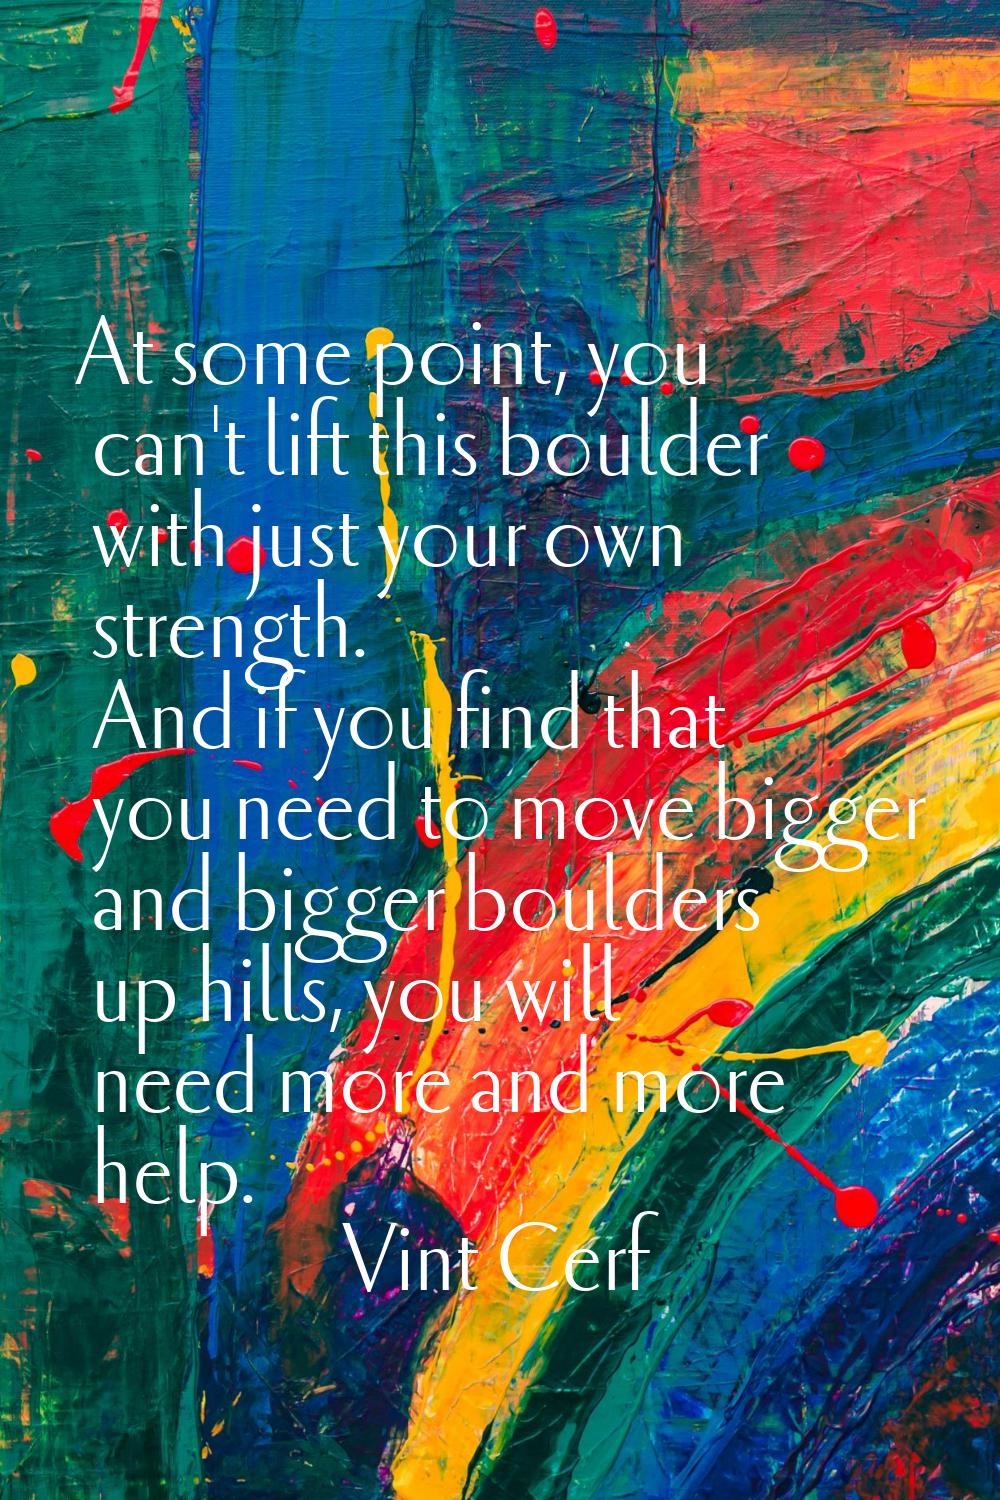 At some point, you can't lift this boulder with just your own strength. And if you find that you ne